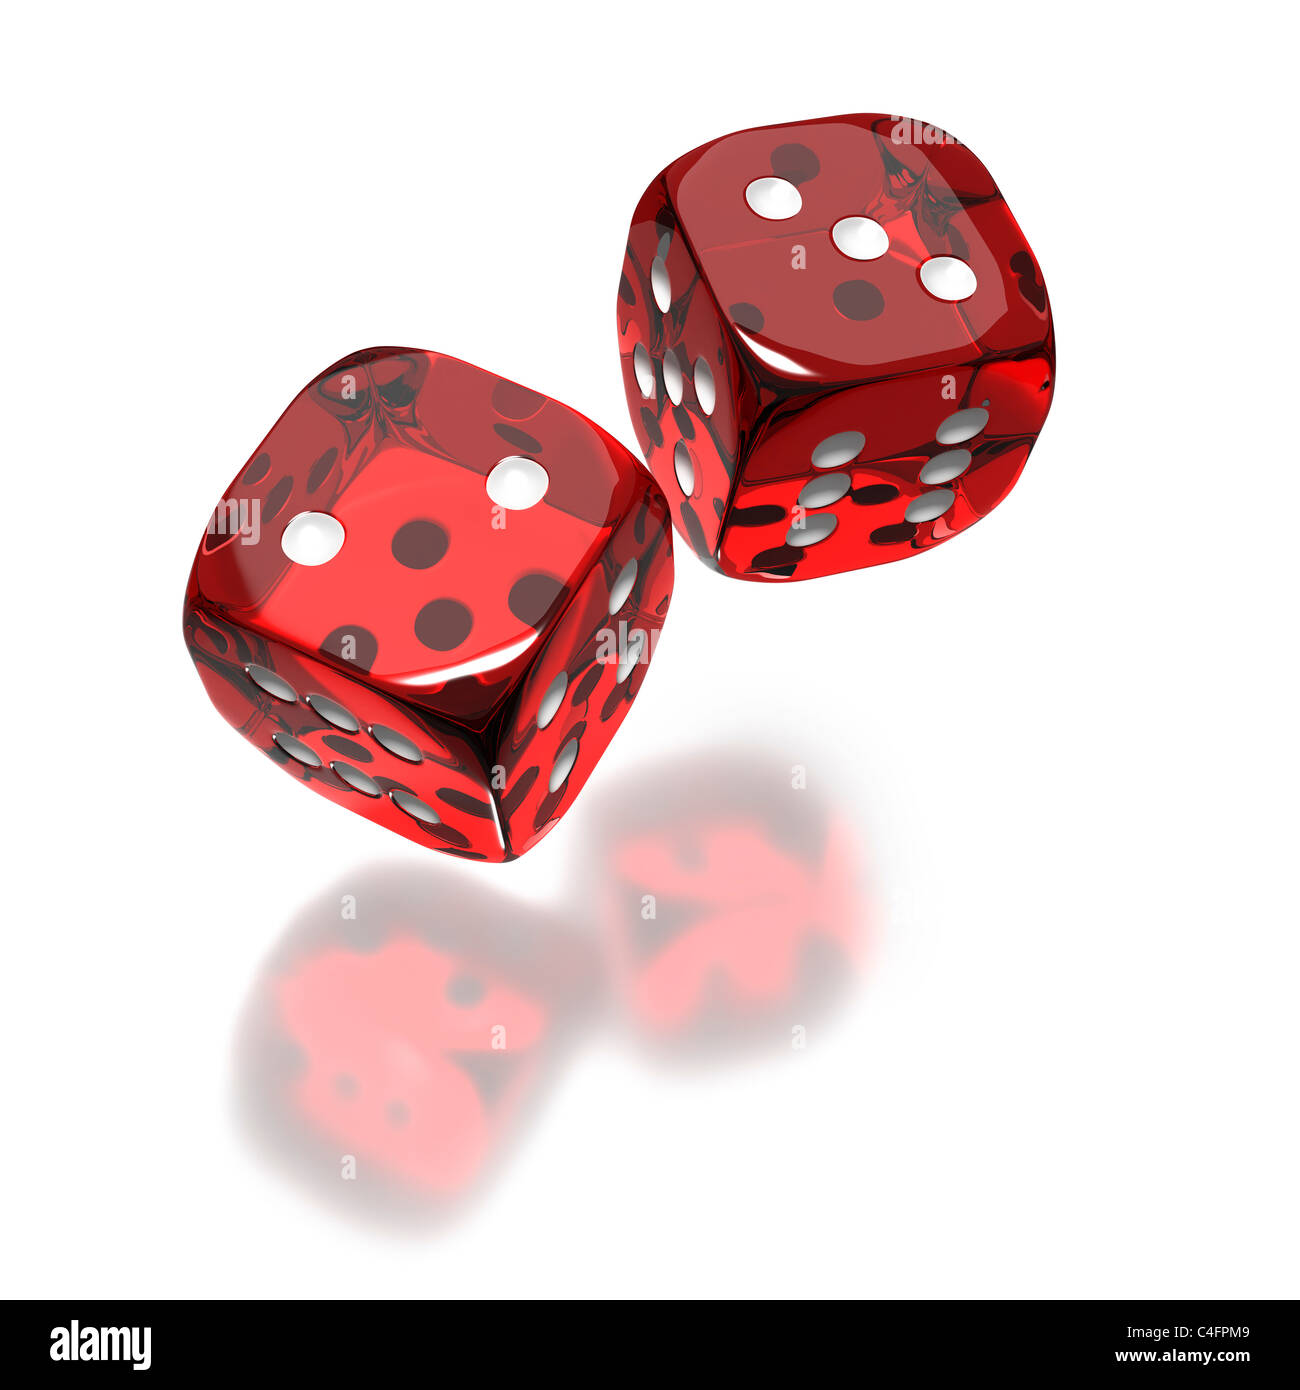 Two red dice flying in the air on white background Stock Photo